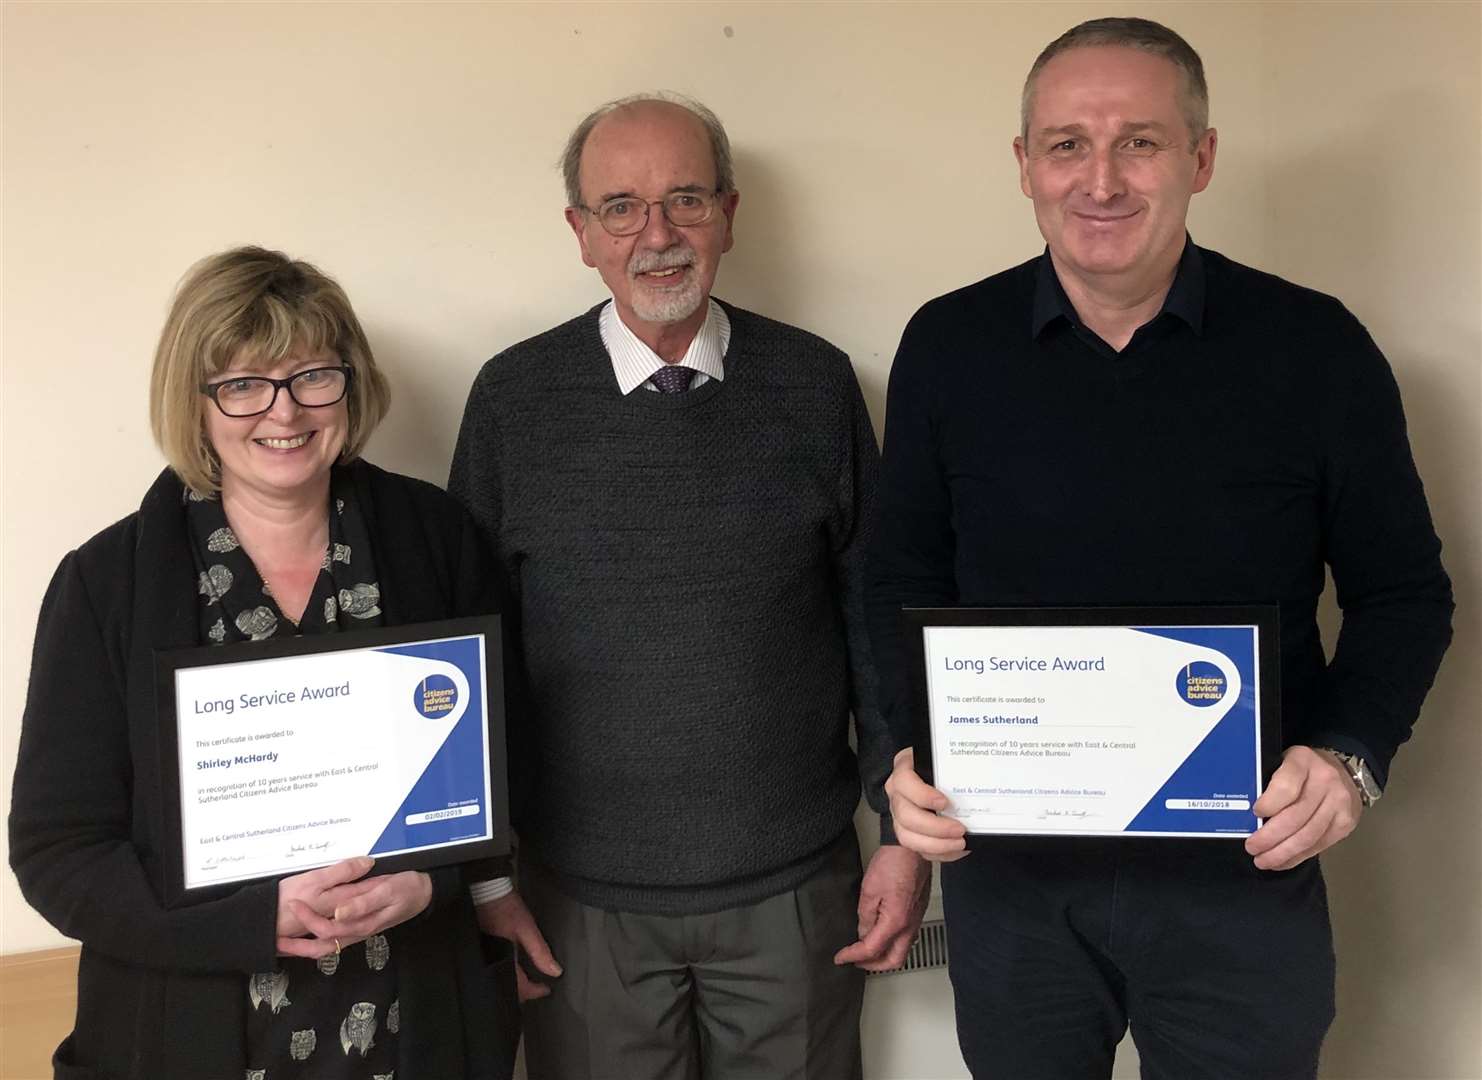 Shirley McHardy and James Sutherland were presented with their long service awards by Michael Small (centre).